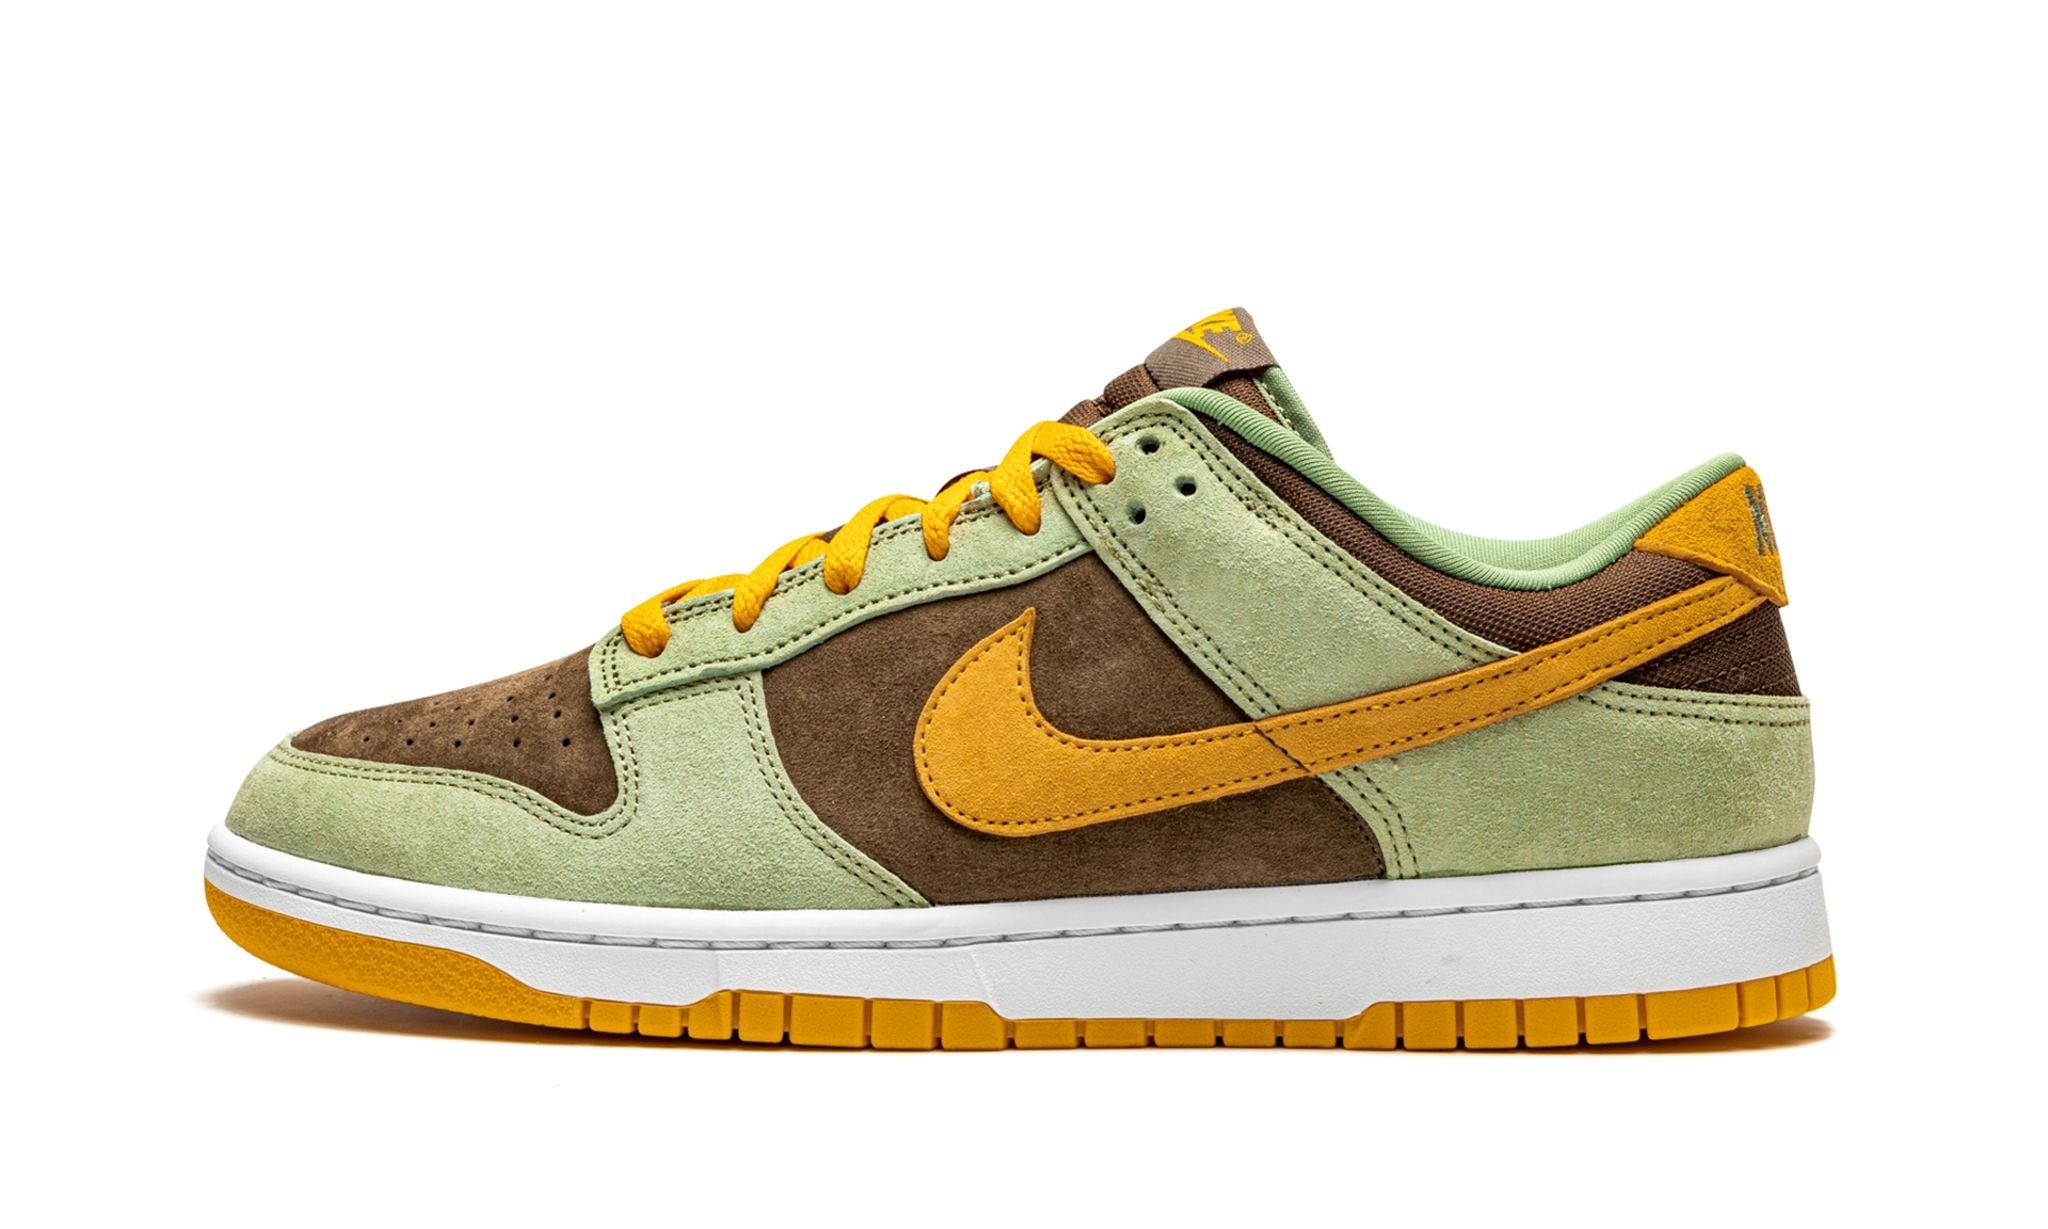 Dunk Low "Dusty Olive" - 1